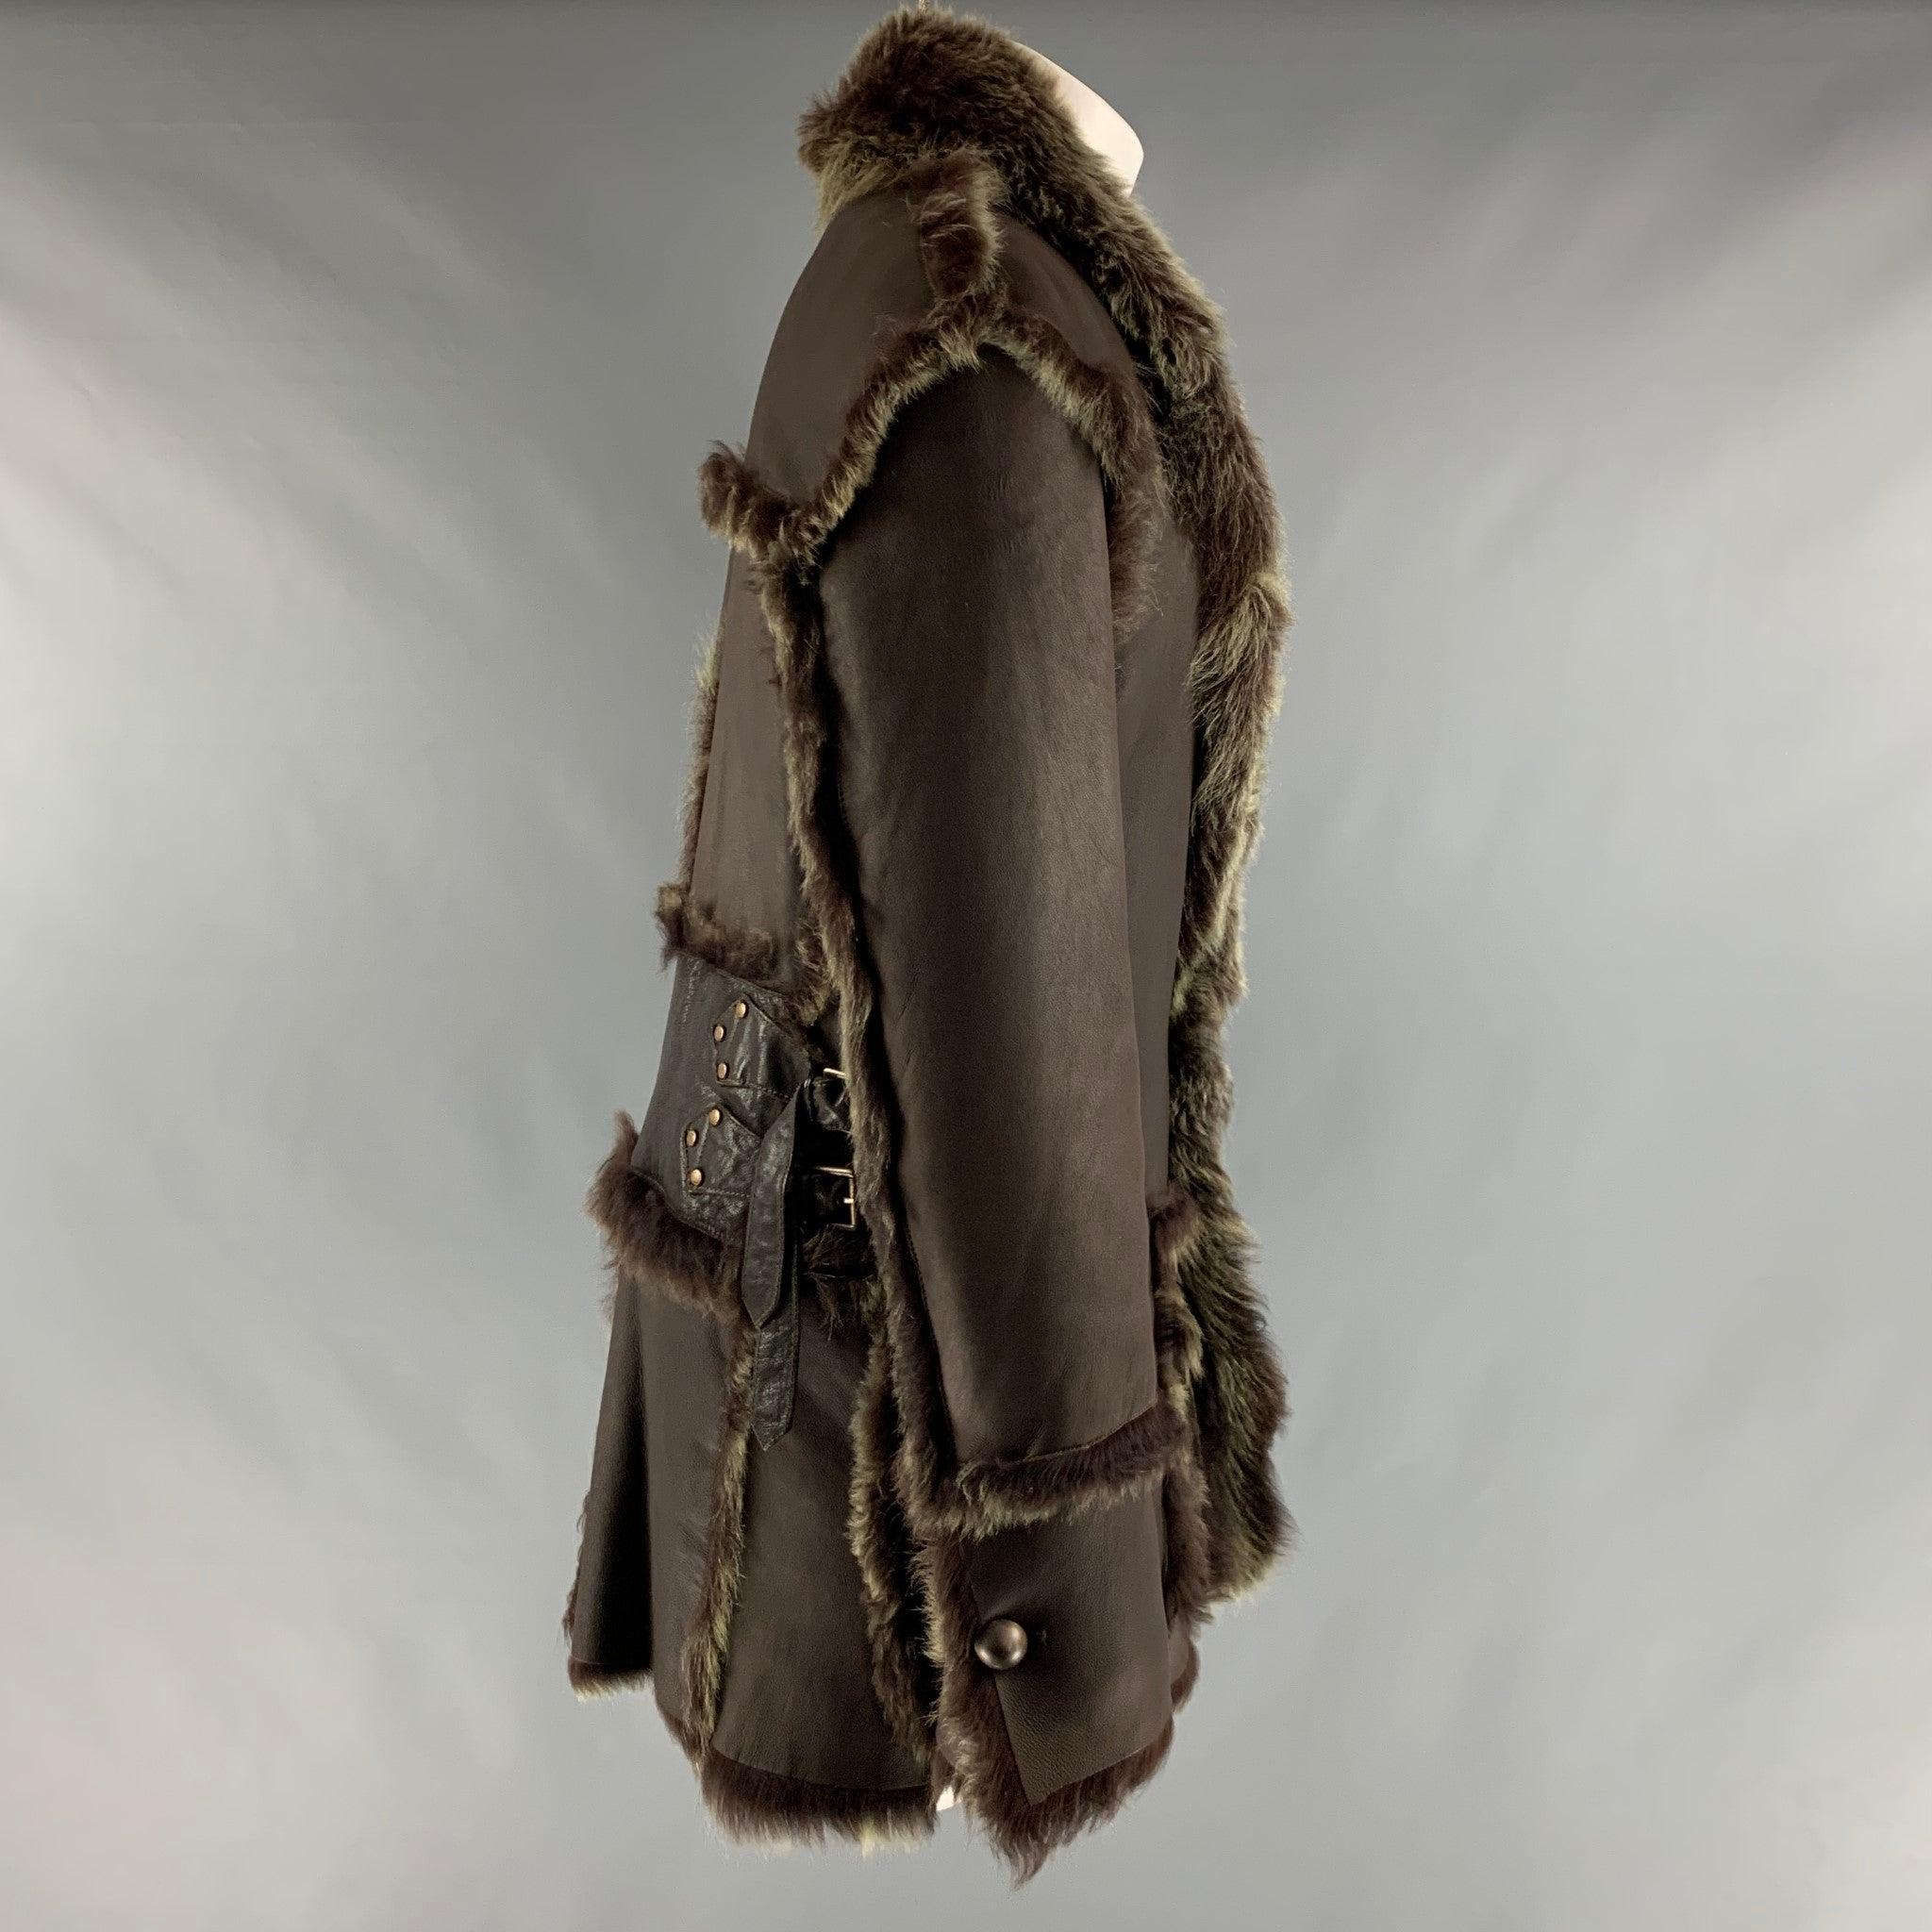 ROBERTO CAVALLI coat comes in a brown leather material featuring a faux fur lining, patch pockets, side buckle details, and a two button closure. Made in Italy.Excellent Pre-Owned Condition. 

Marked:  40 

Measurements: 
 
Shoulder: 20 inches